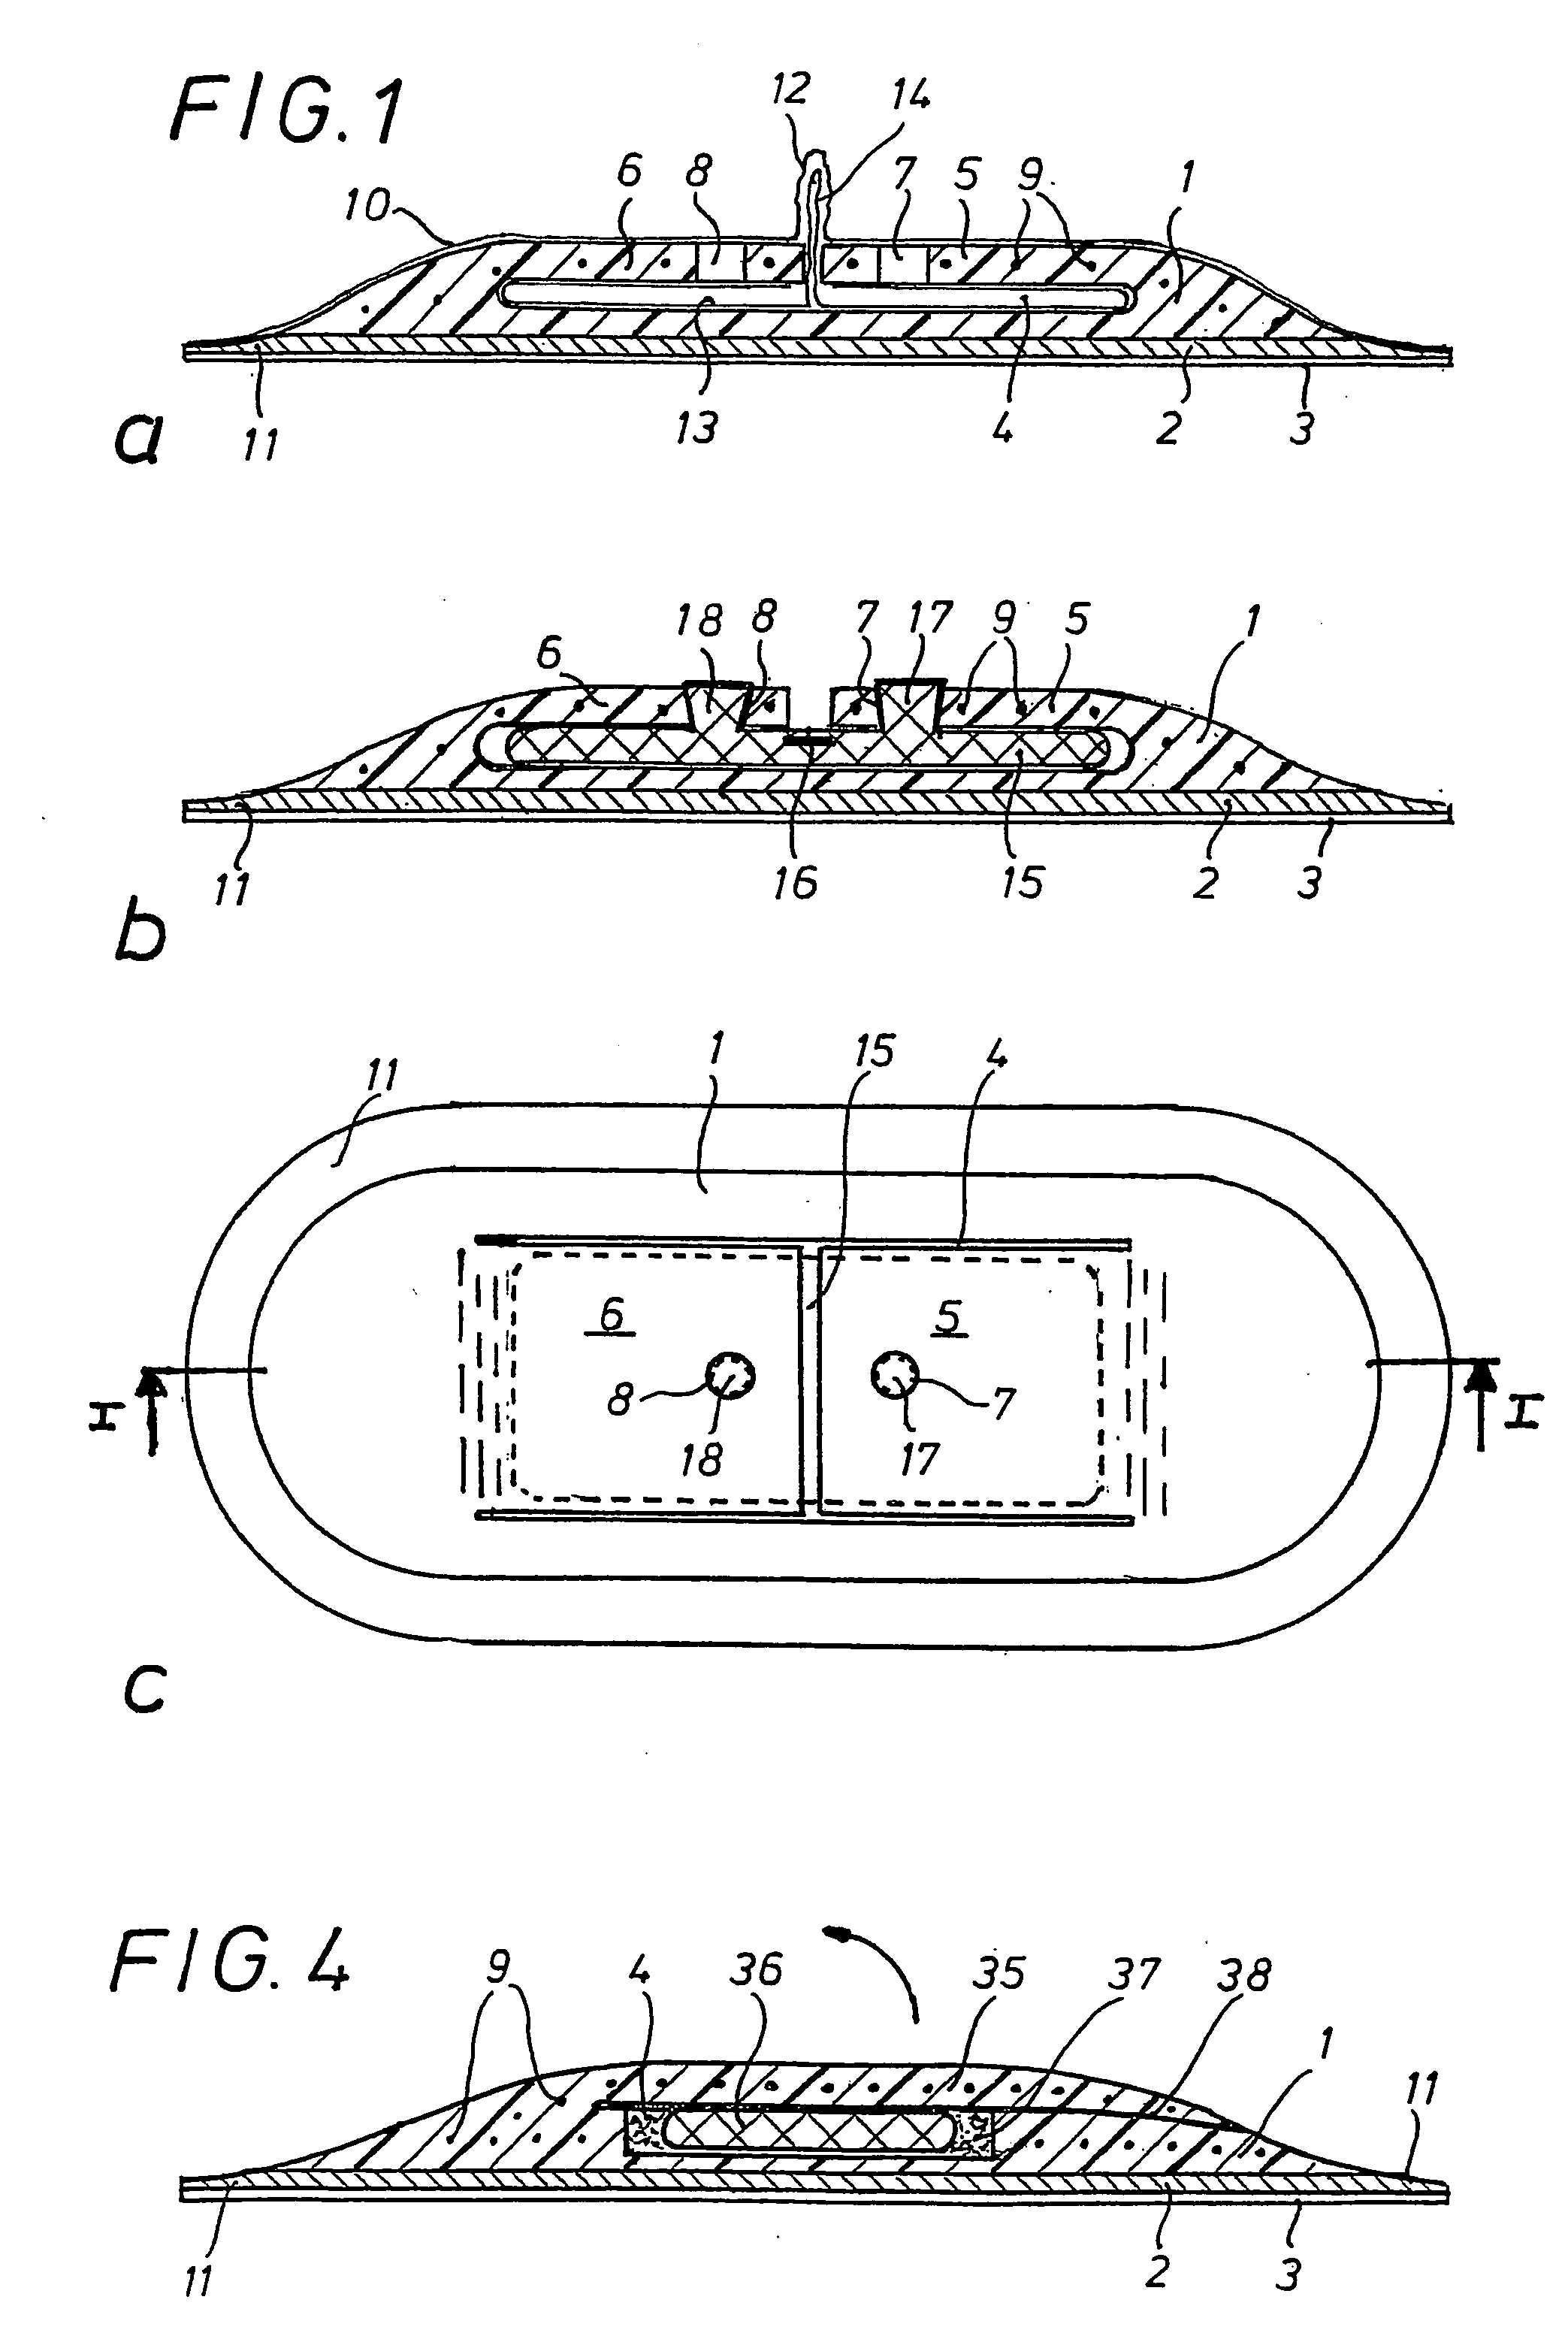 Mount for attaching an electronic component to a rubber article